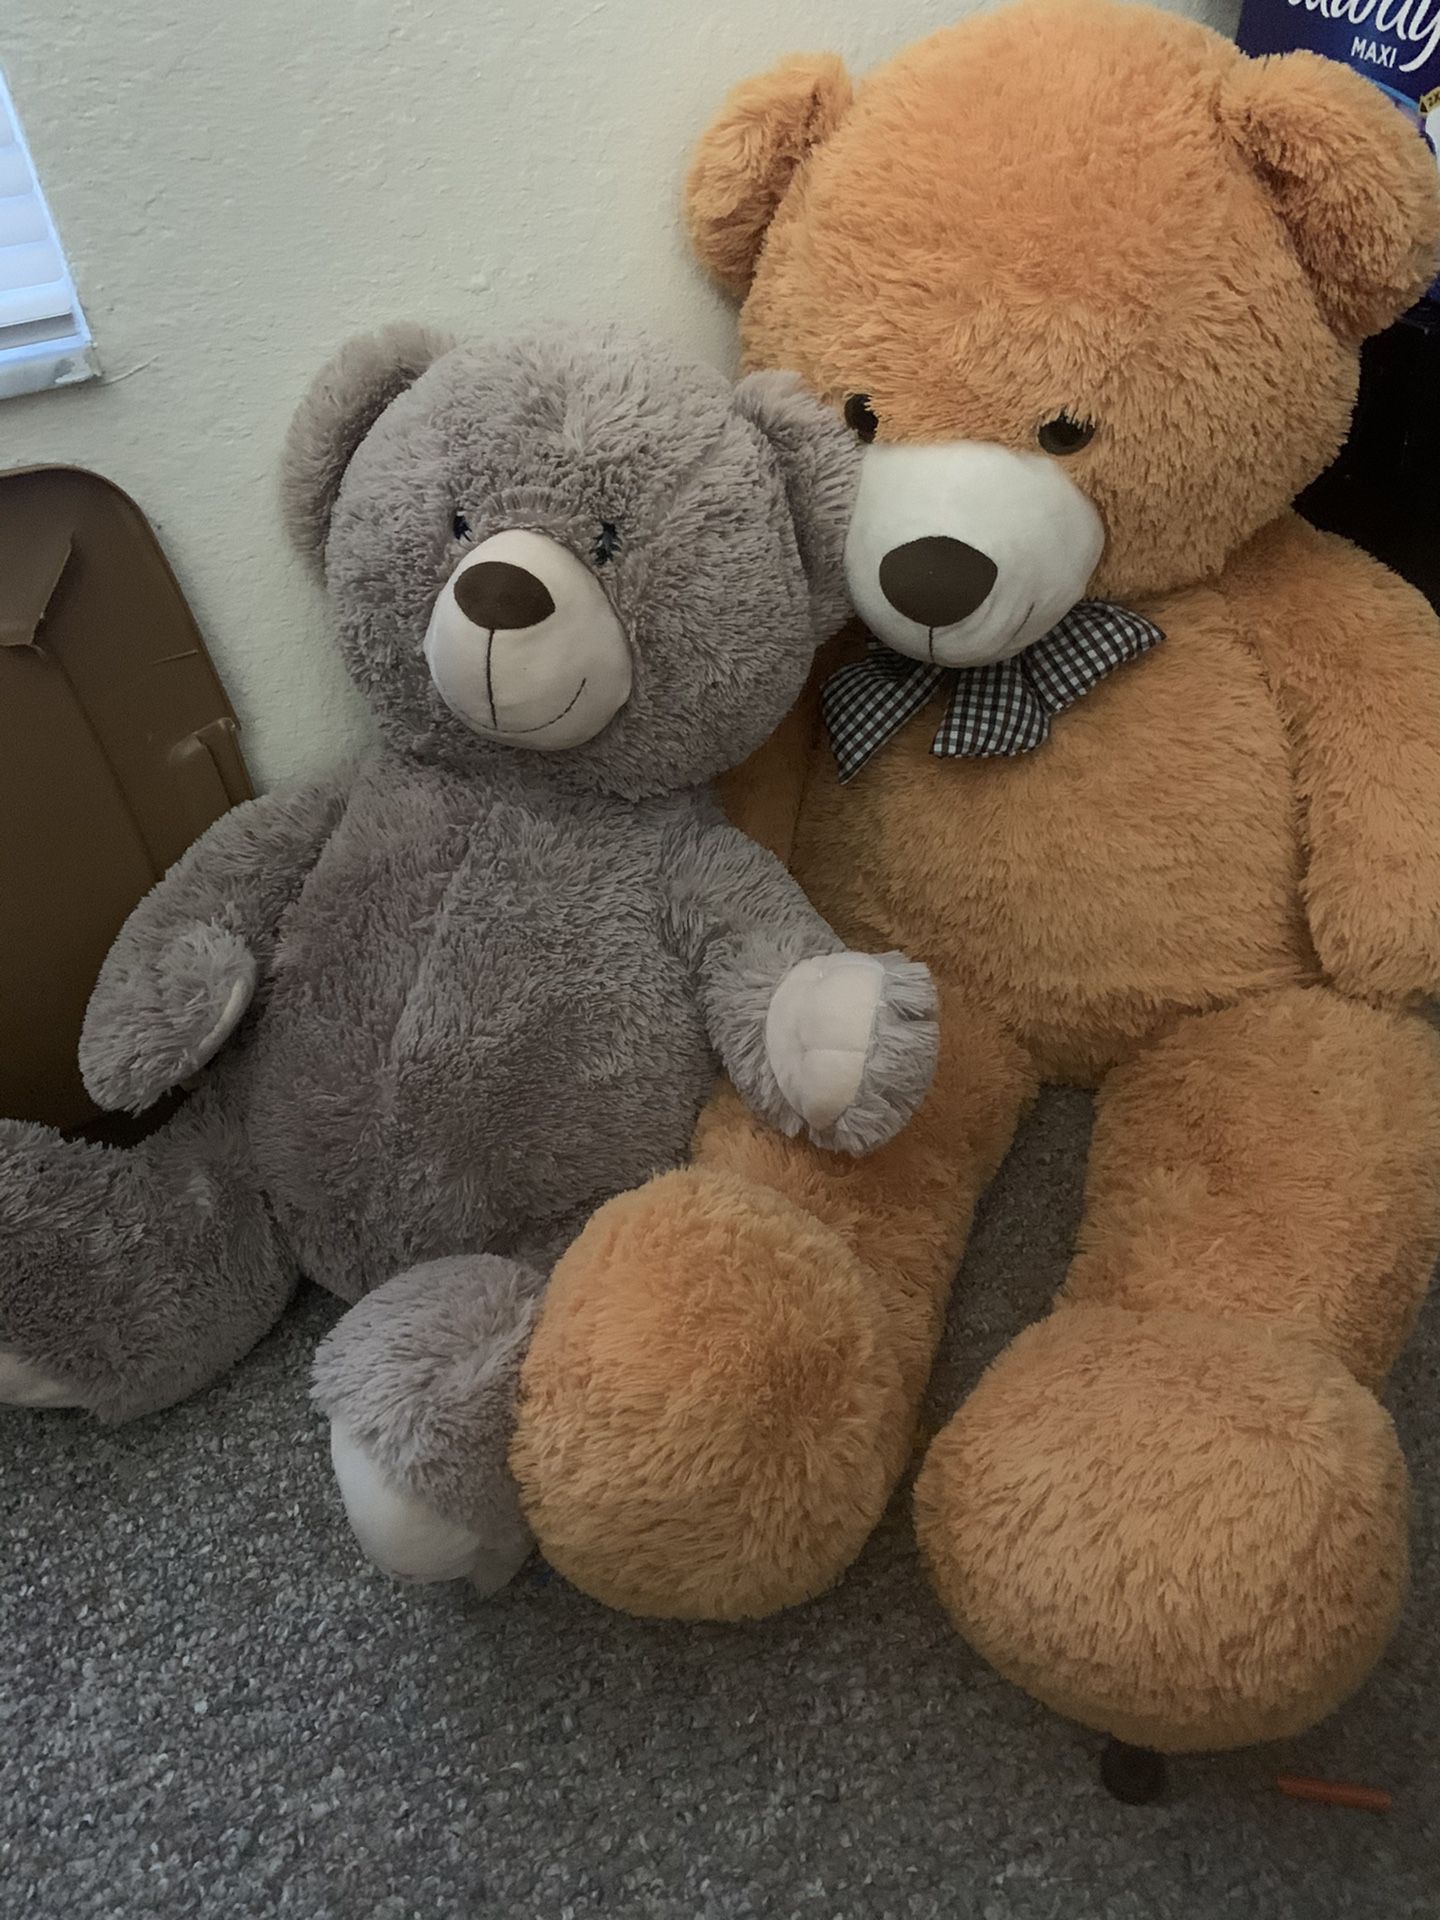 Large teddy bears for both